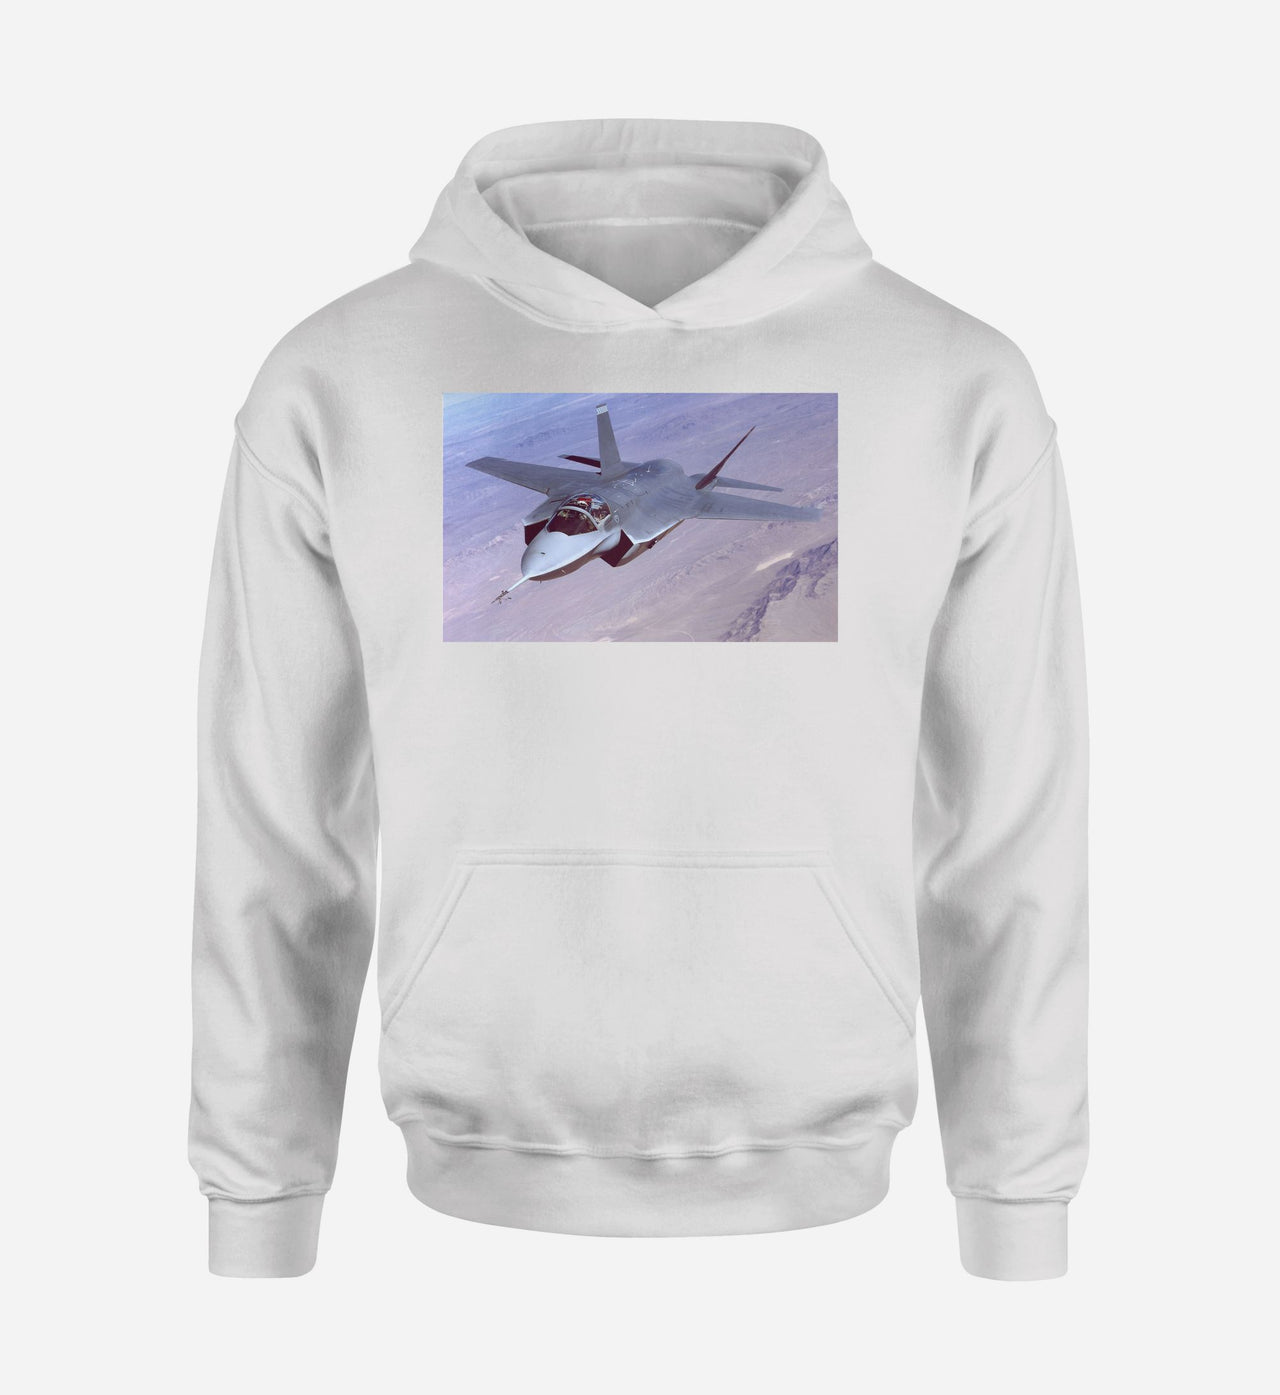 Fighting Falcon F35 Captured in the Air Designed Hoodies